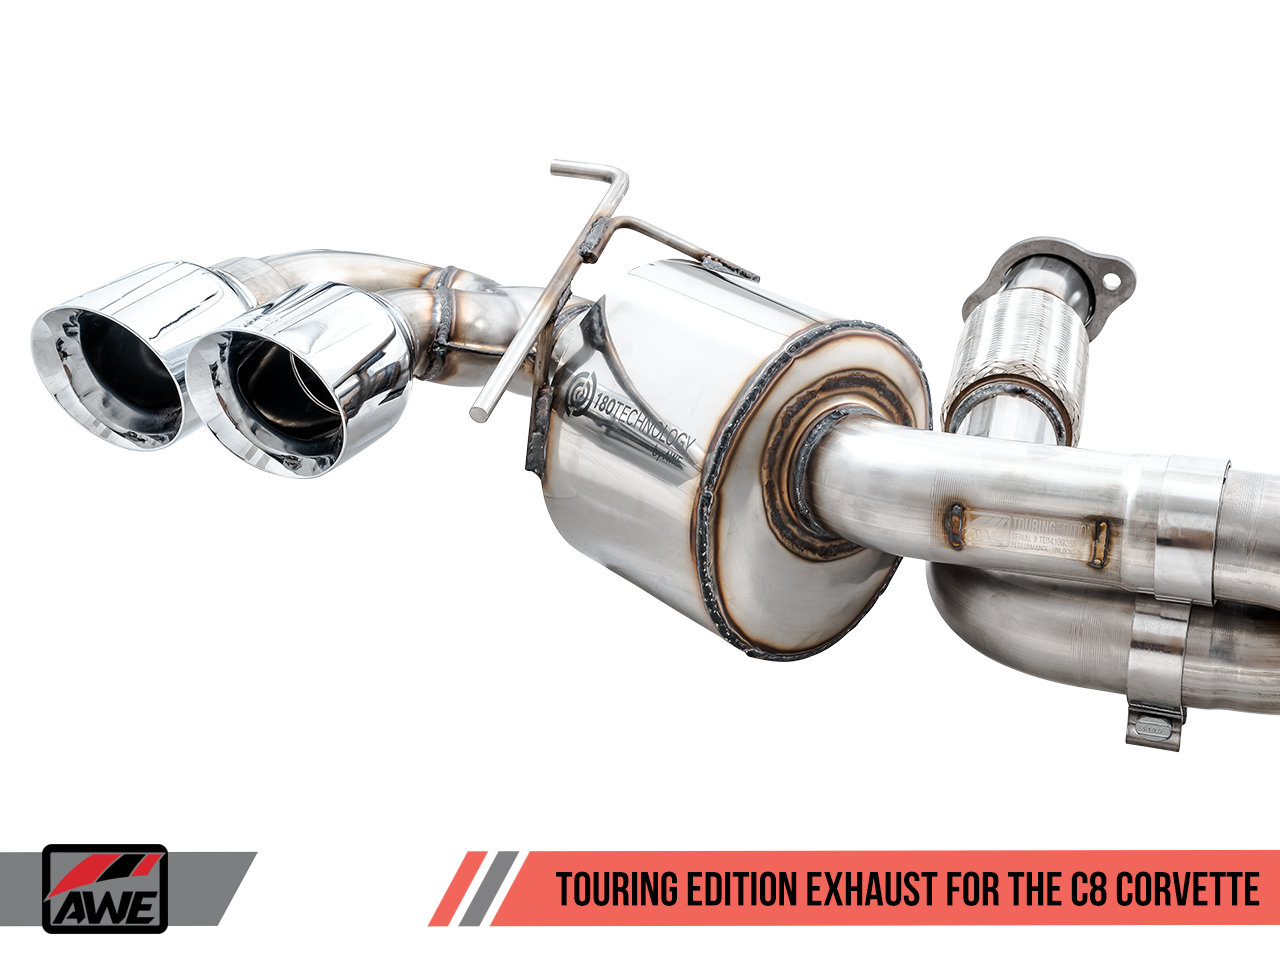 AWE Exhaust Suite for the Chevrolet C8 Corvette